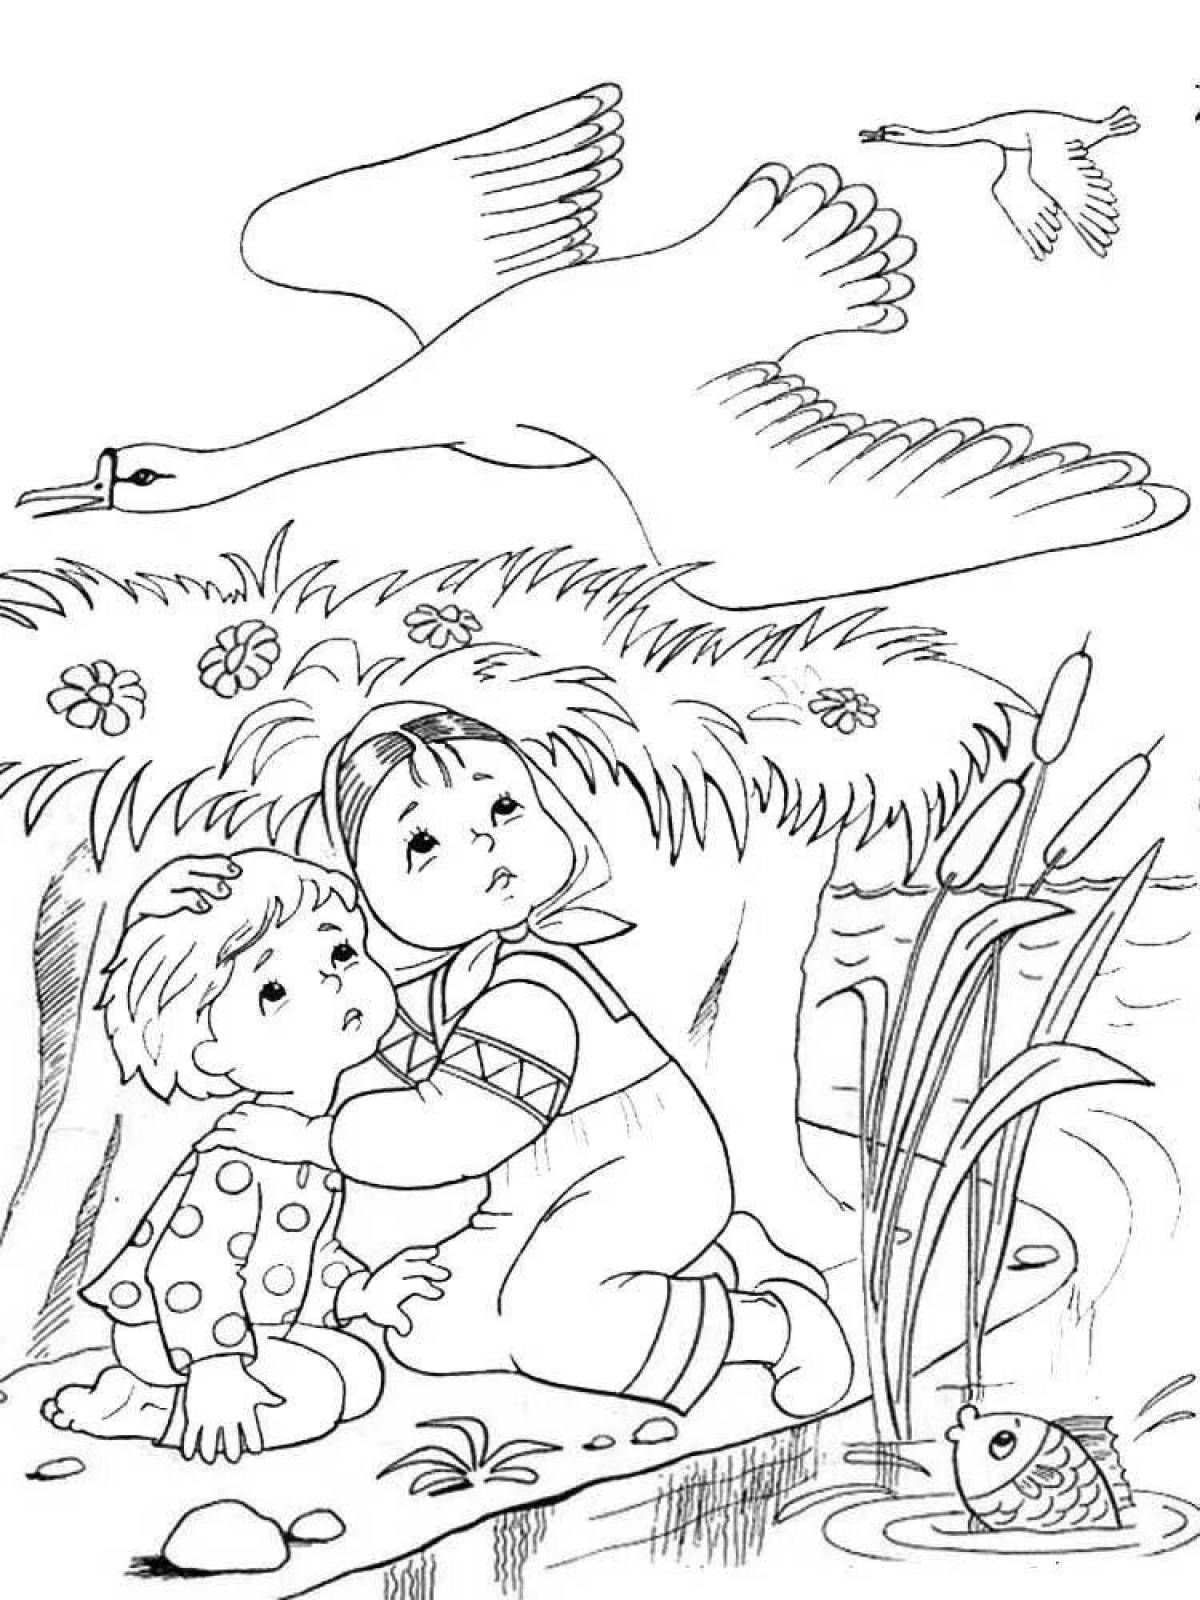 Amazing swan geese coloring pages for kids